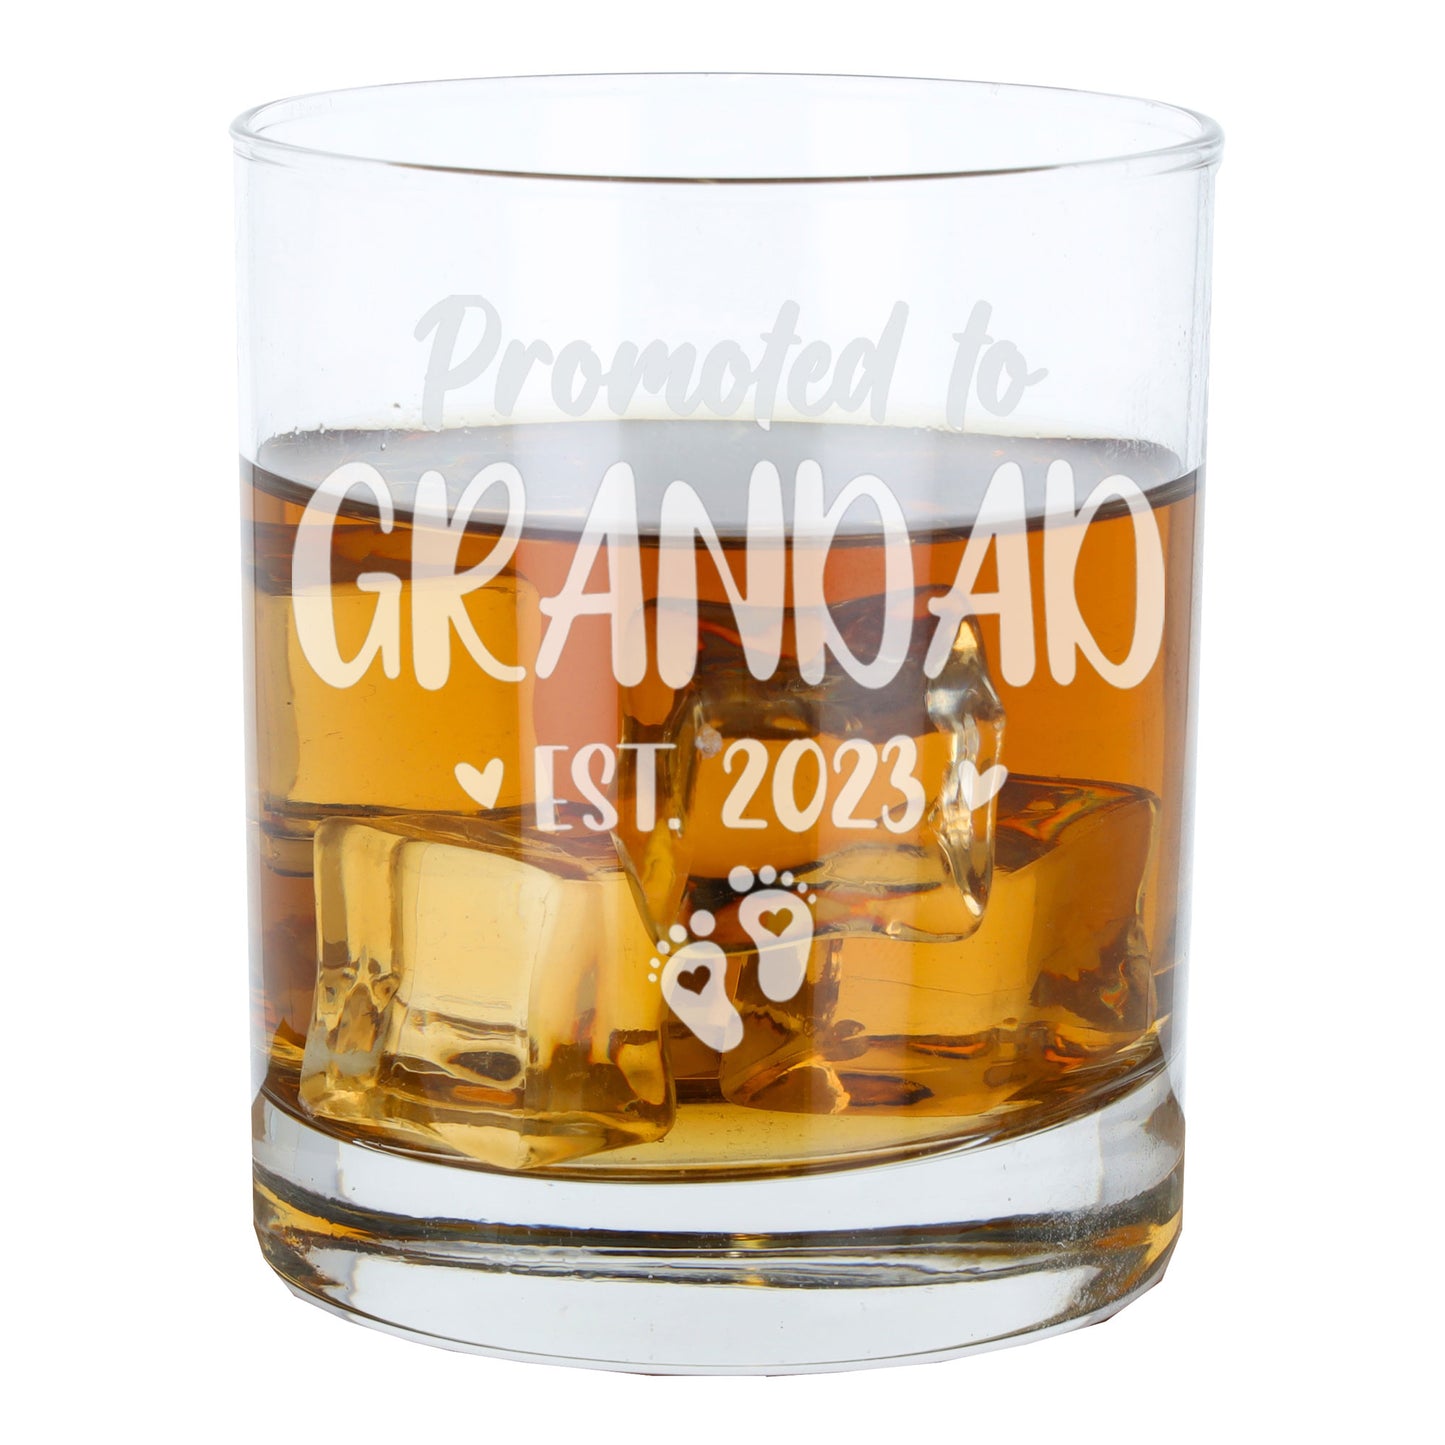 Promoted To Grandad Engraved Whisky Glass  - Always Looking Good -   